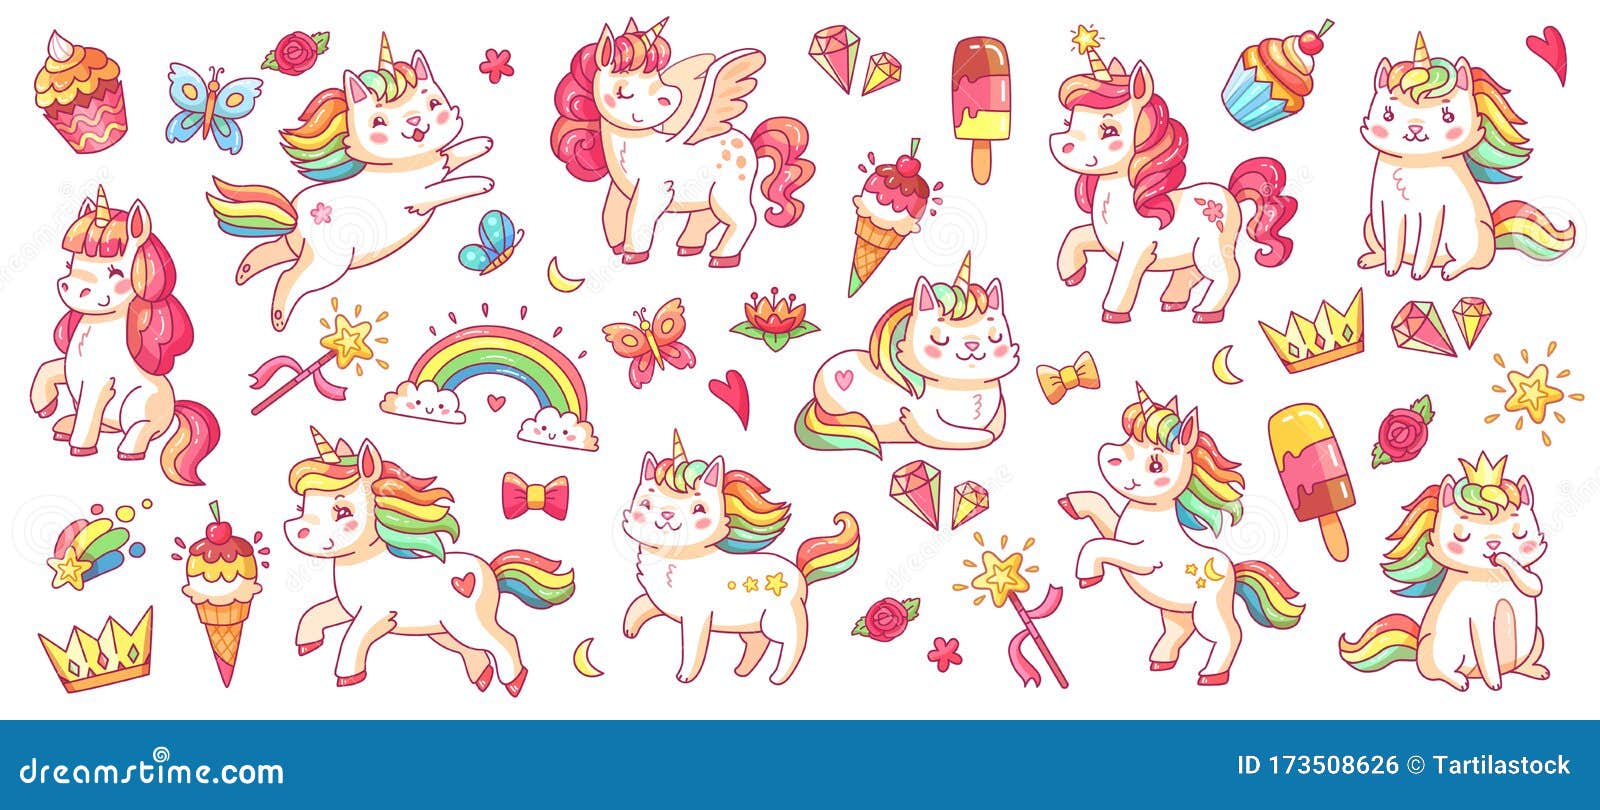 Download Cute Pony And Cat Unicorns. Isolated Cartoon Vector ...